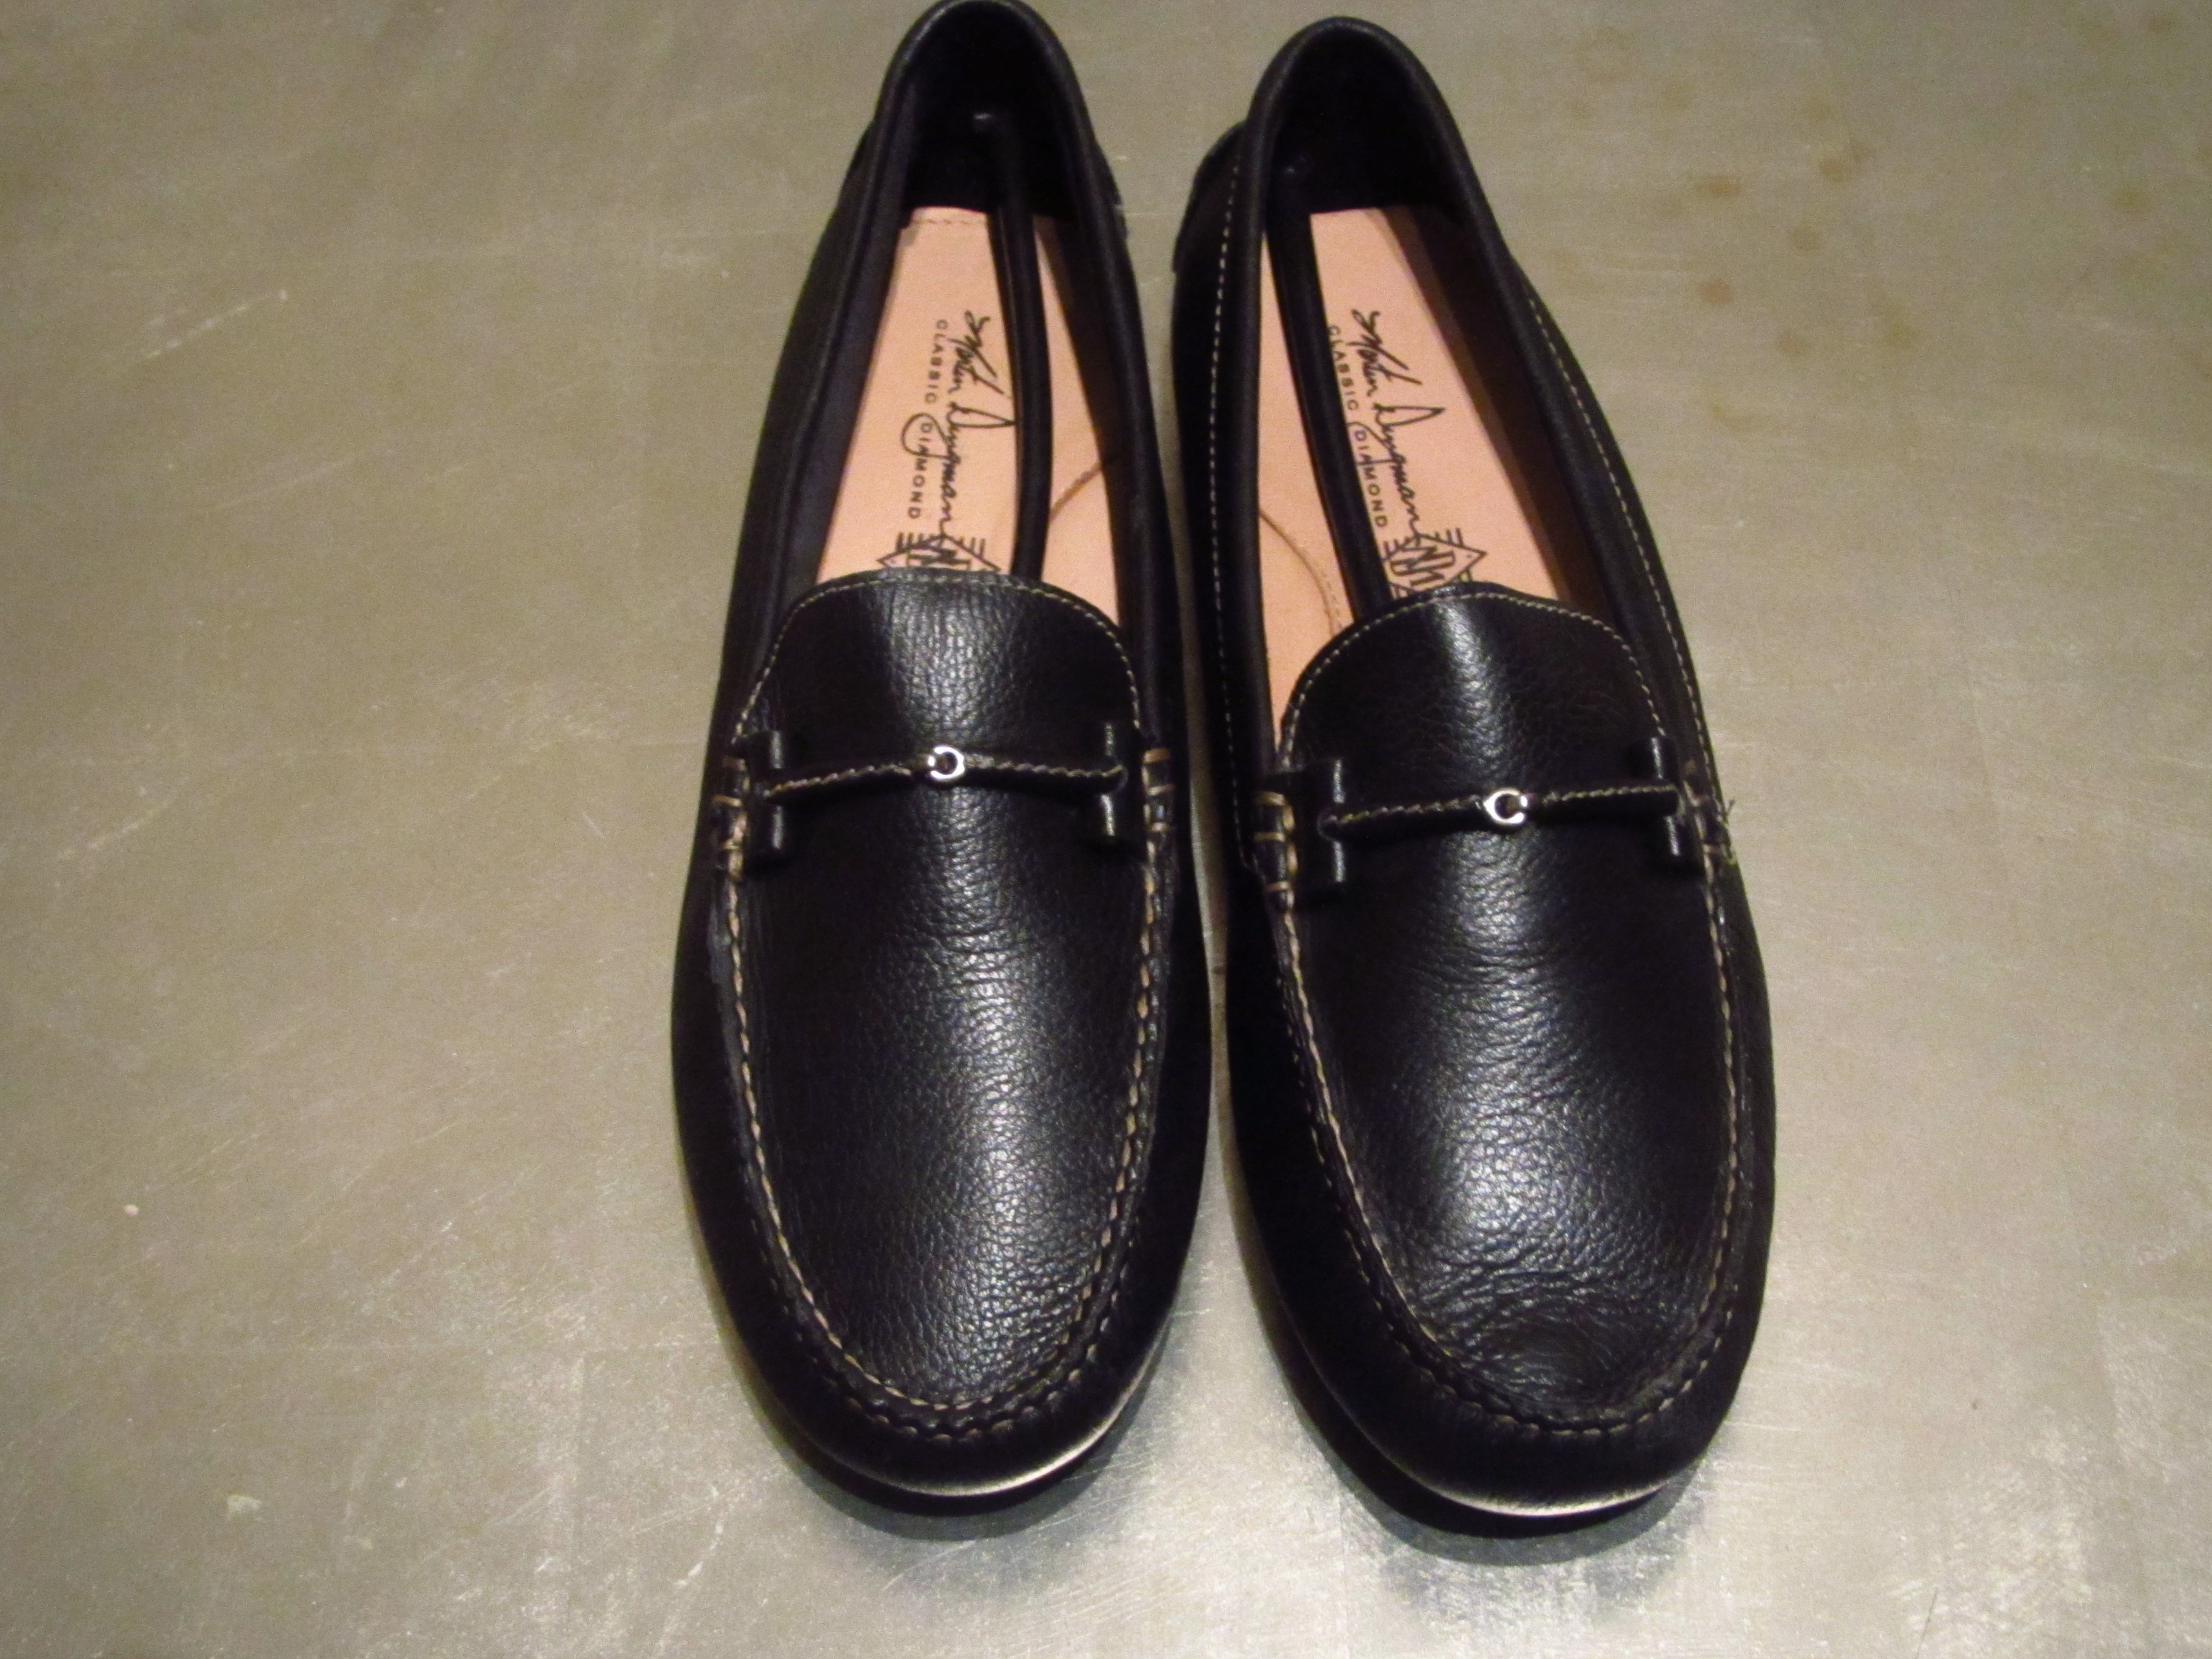 50 PAIR OF CURRENT S/S COLLECTION, NWOB MARTIN DINGMAN LOAFERS | Styleforum